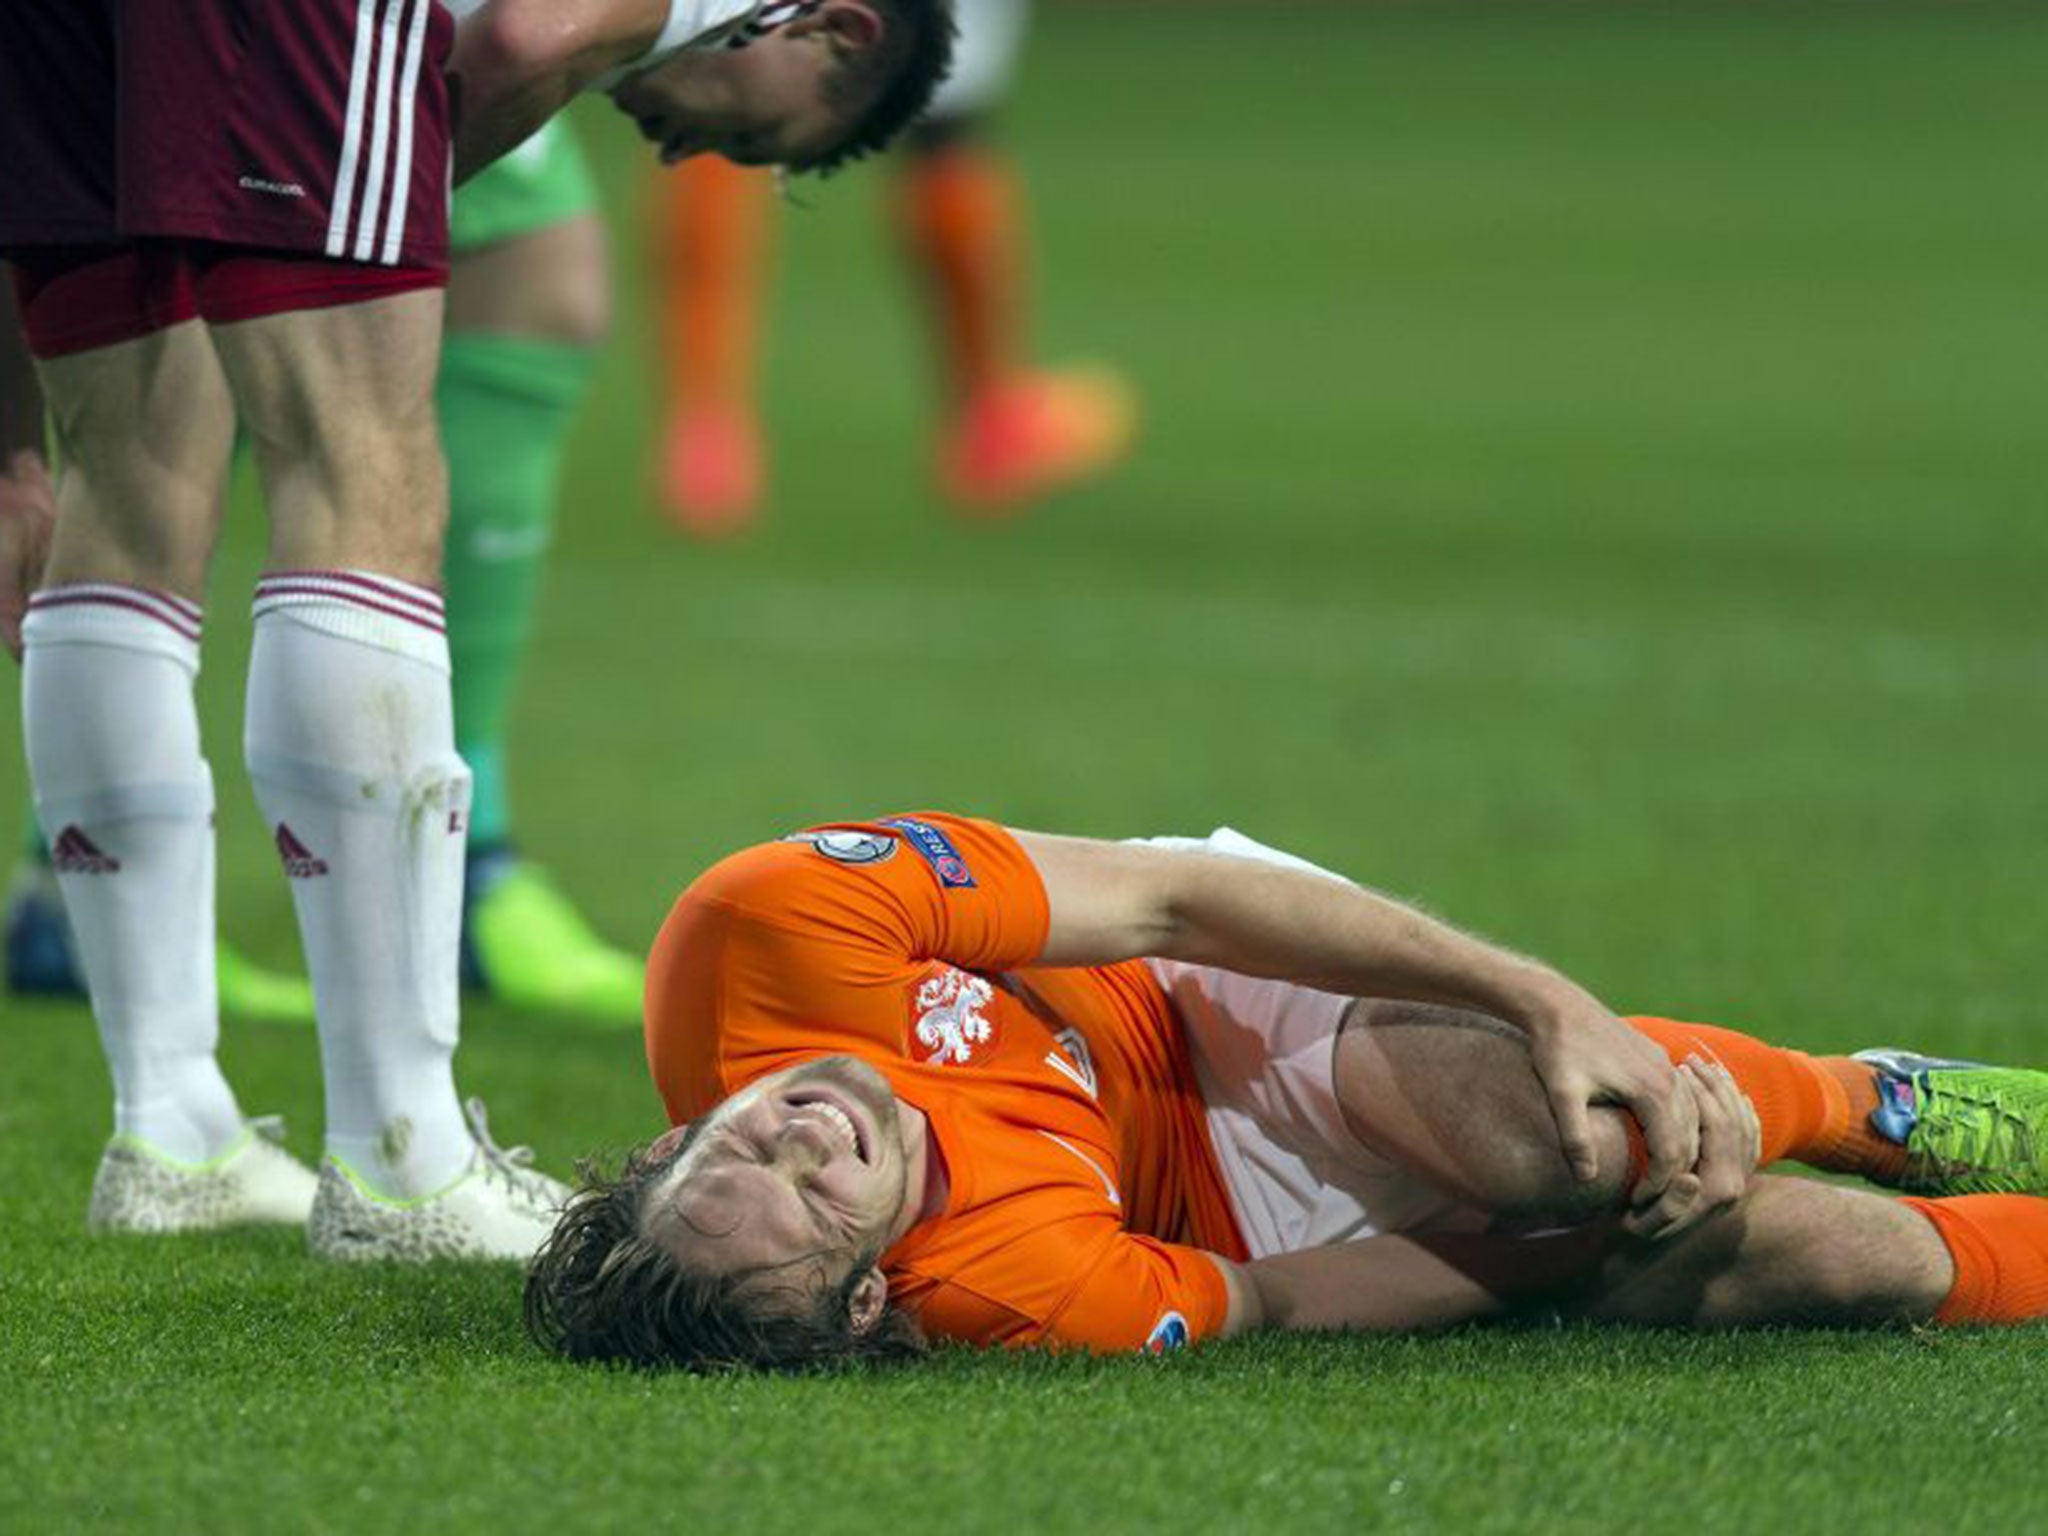 Daley Blind of the Netherlands lies injured after a challenge with Latvia's Eduards Viskanovs during their Euro 2016 Group A qualifier